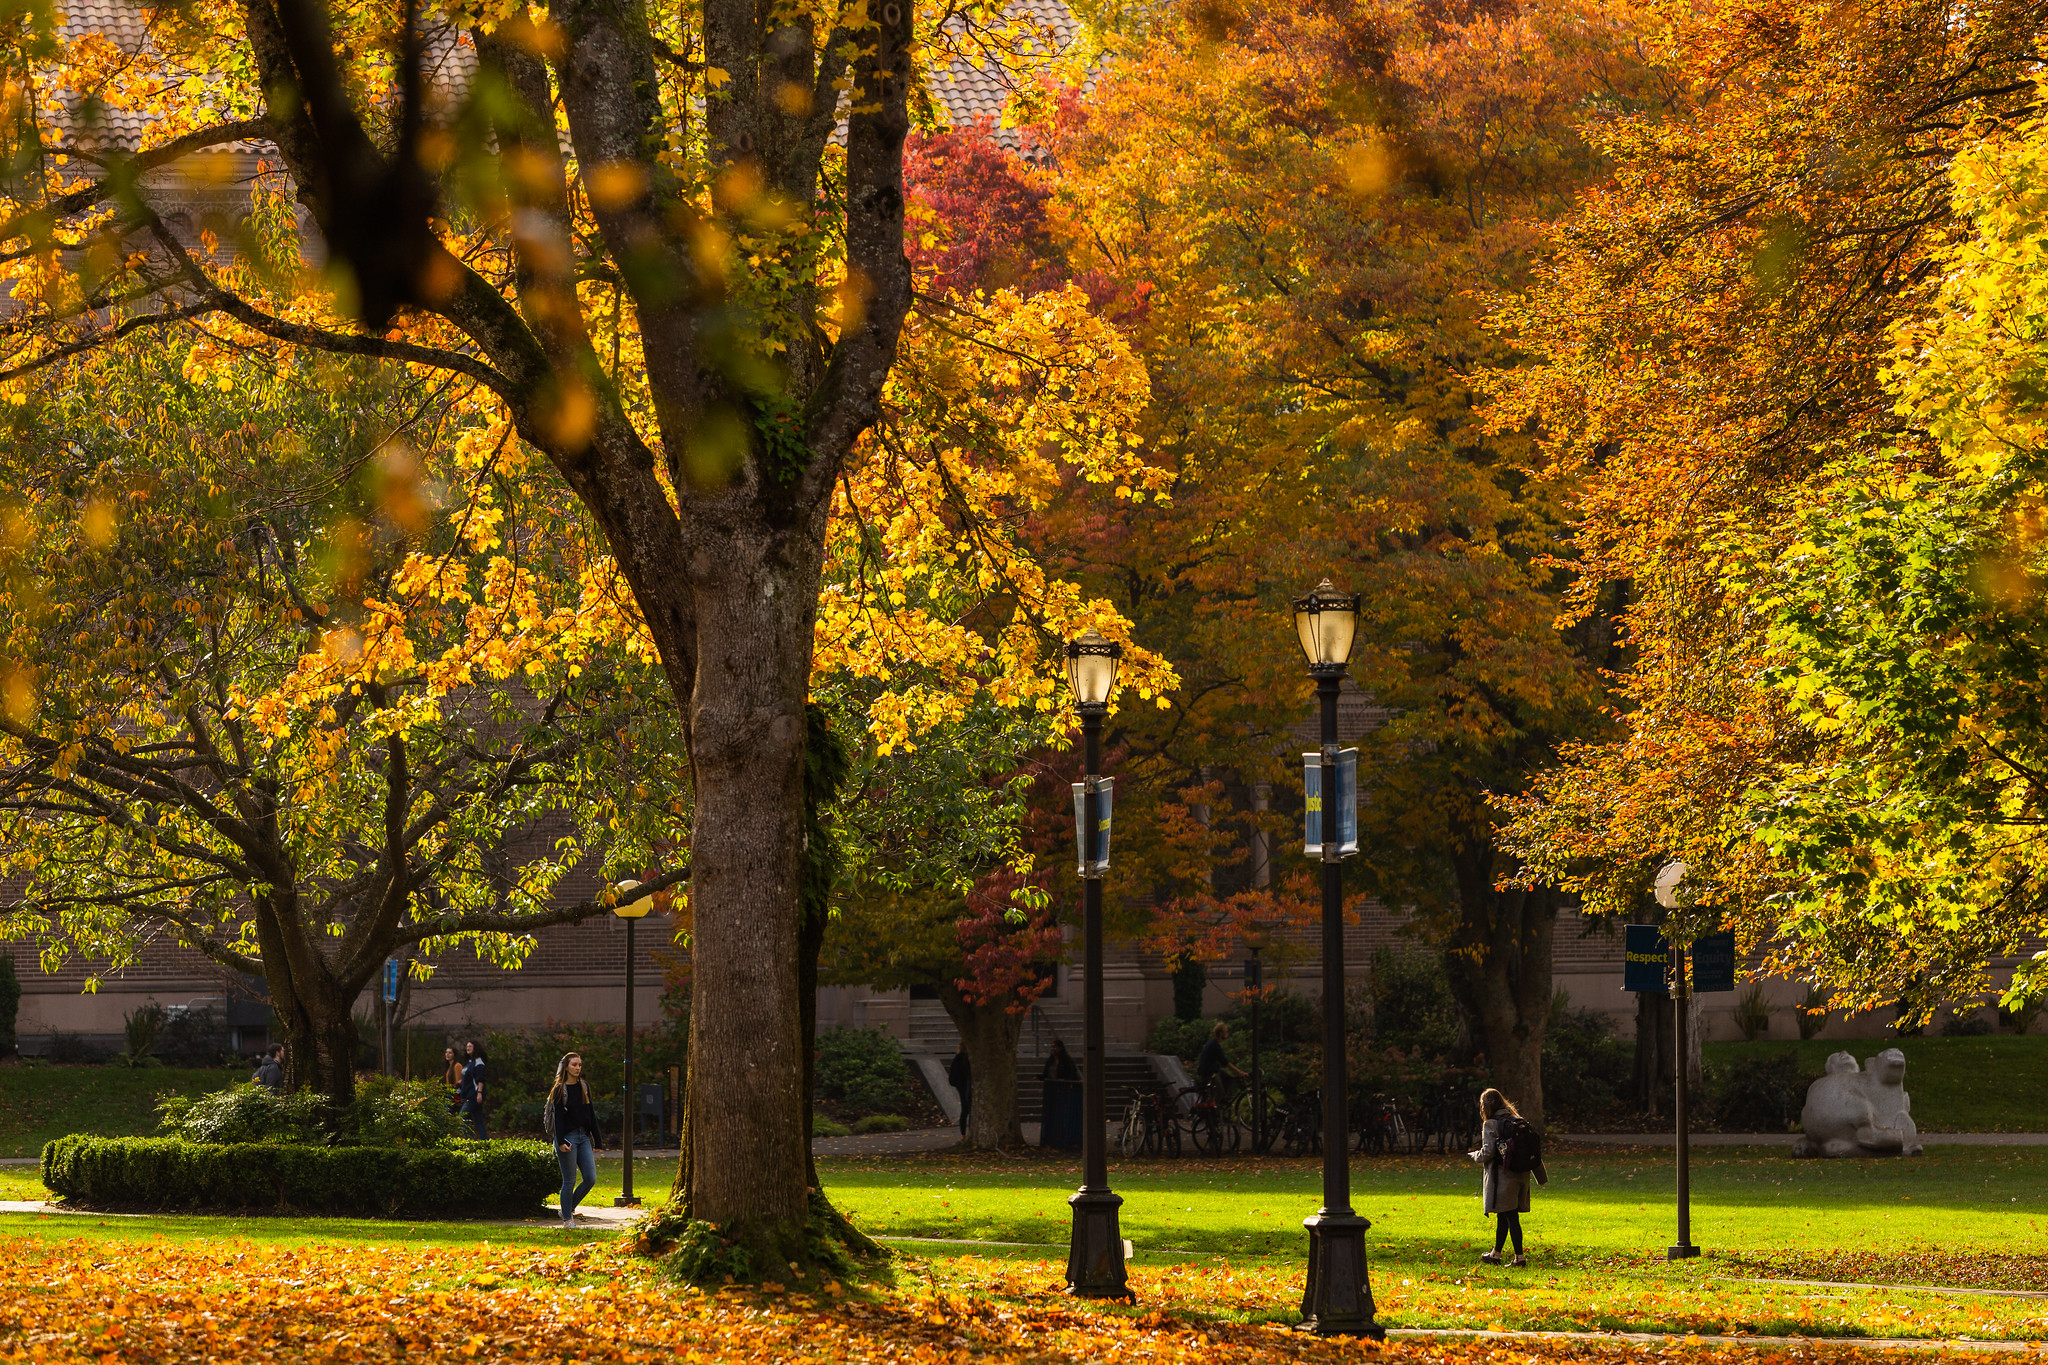 Old Main Lawn in fall with many trees and leaves on the ground